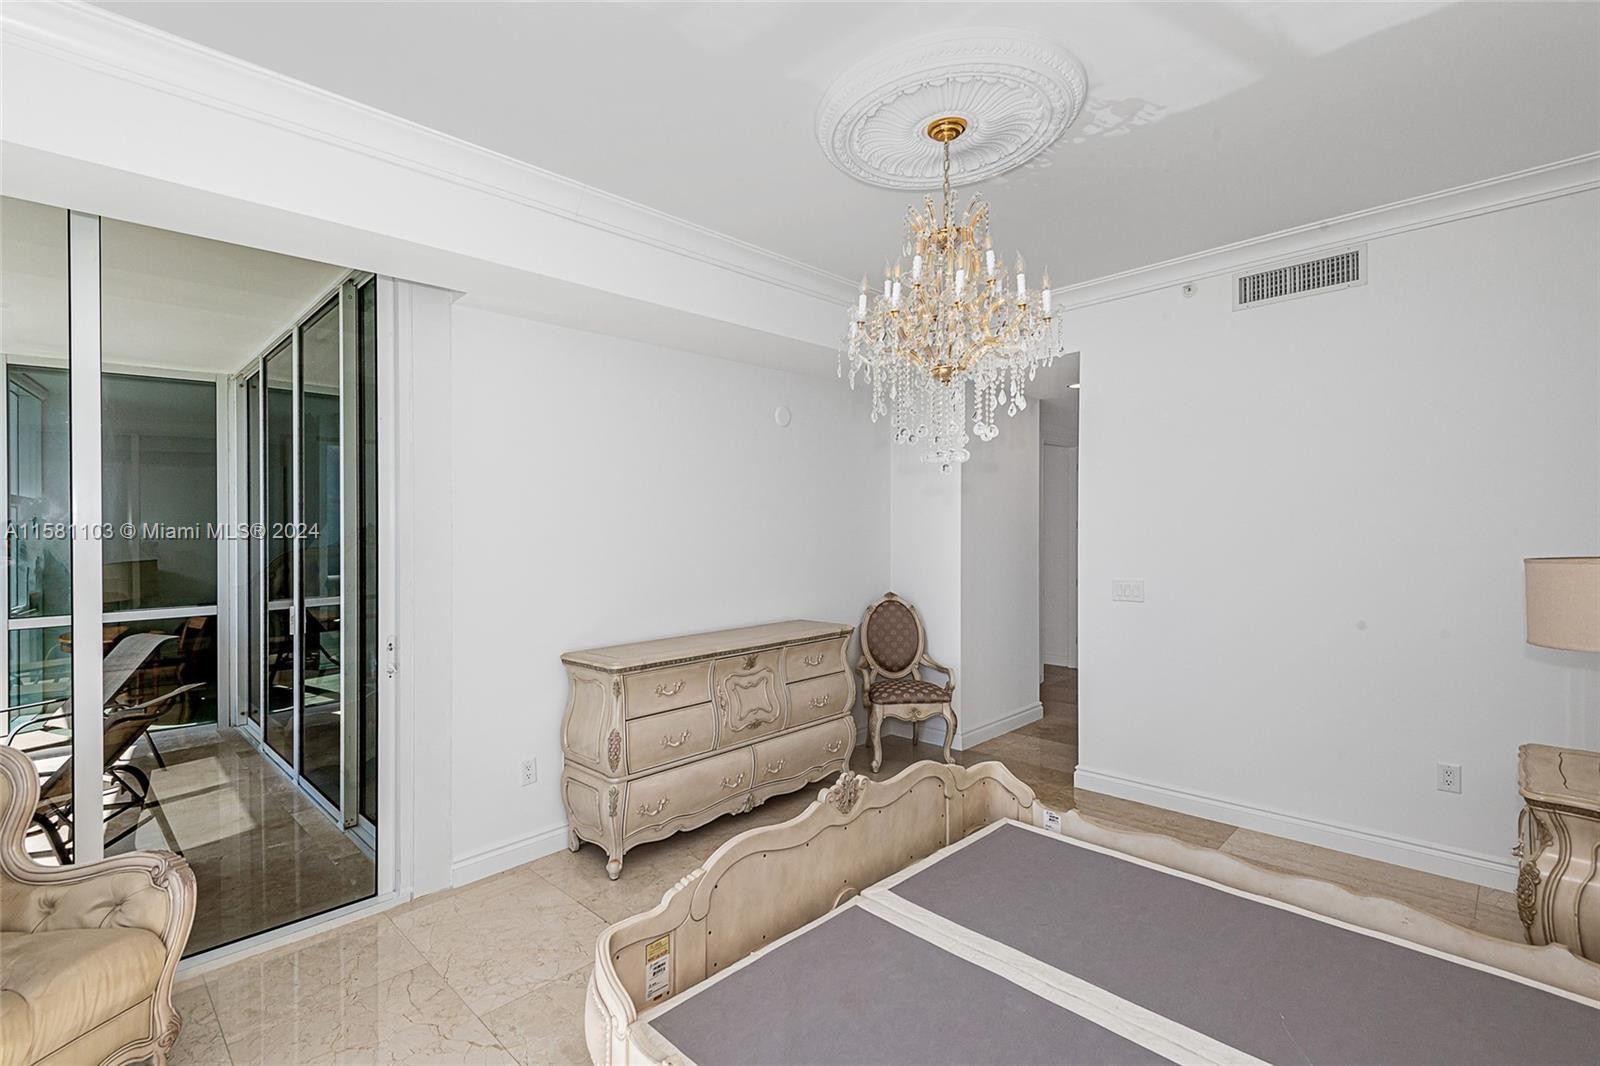 15. 18101 Collins Ave (2,167 Sq.Ft.)